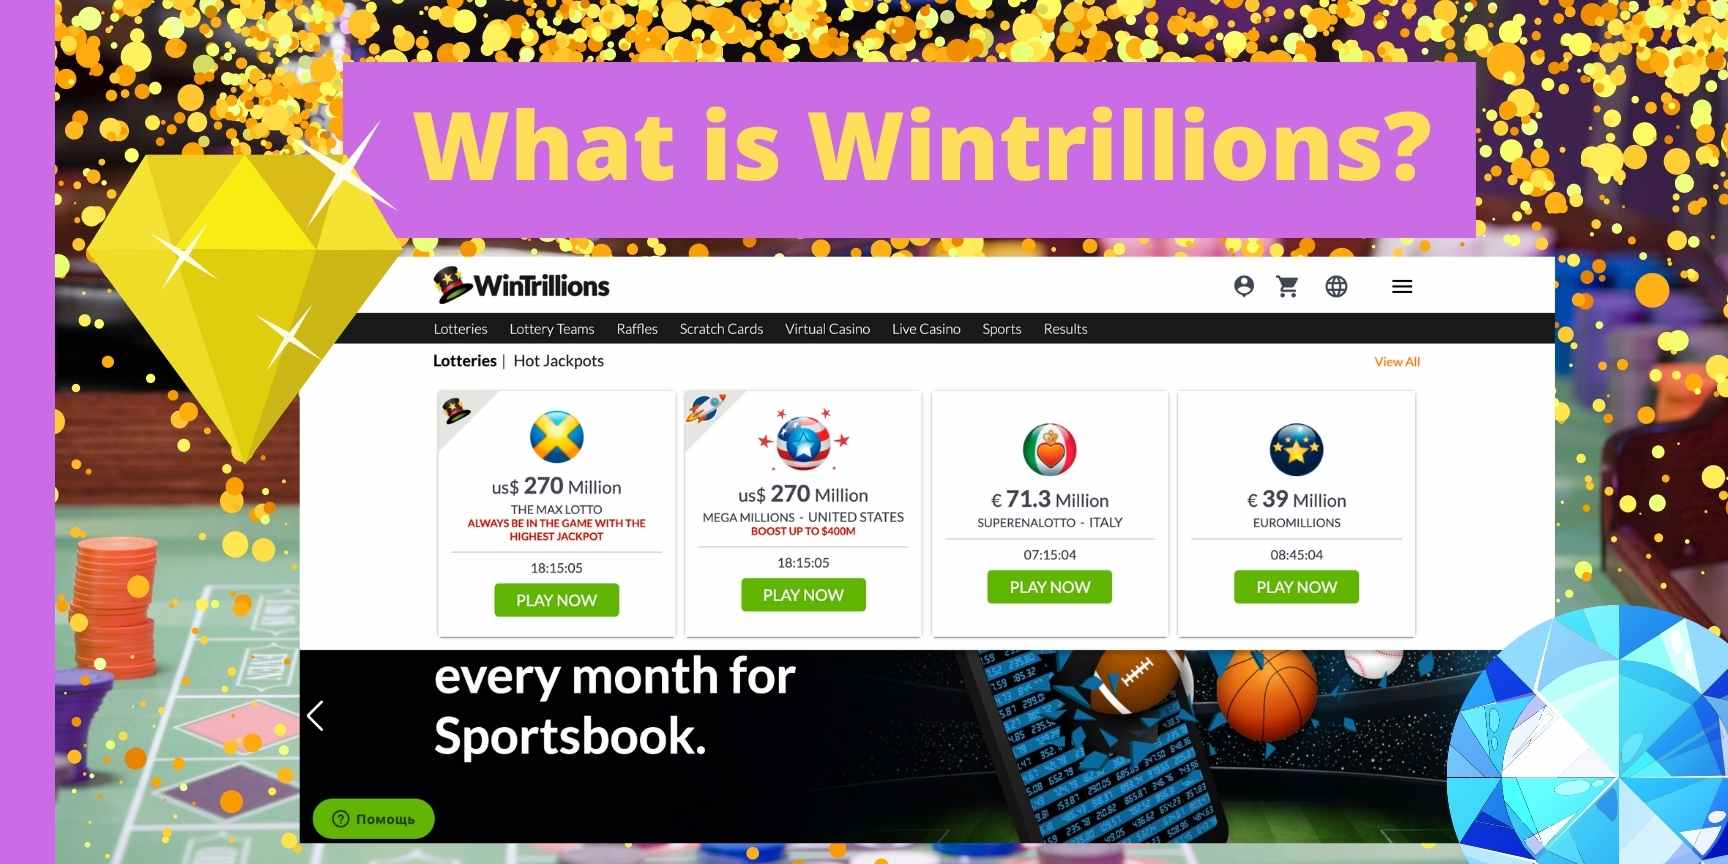 what is wintrillions?